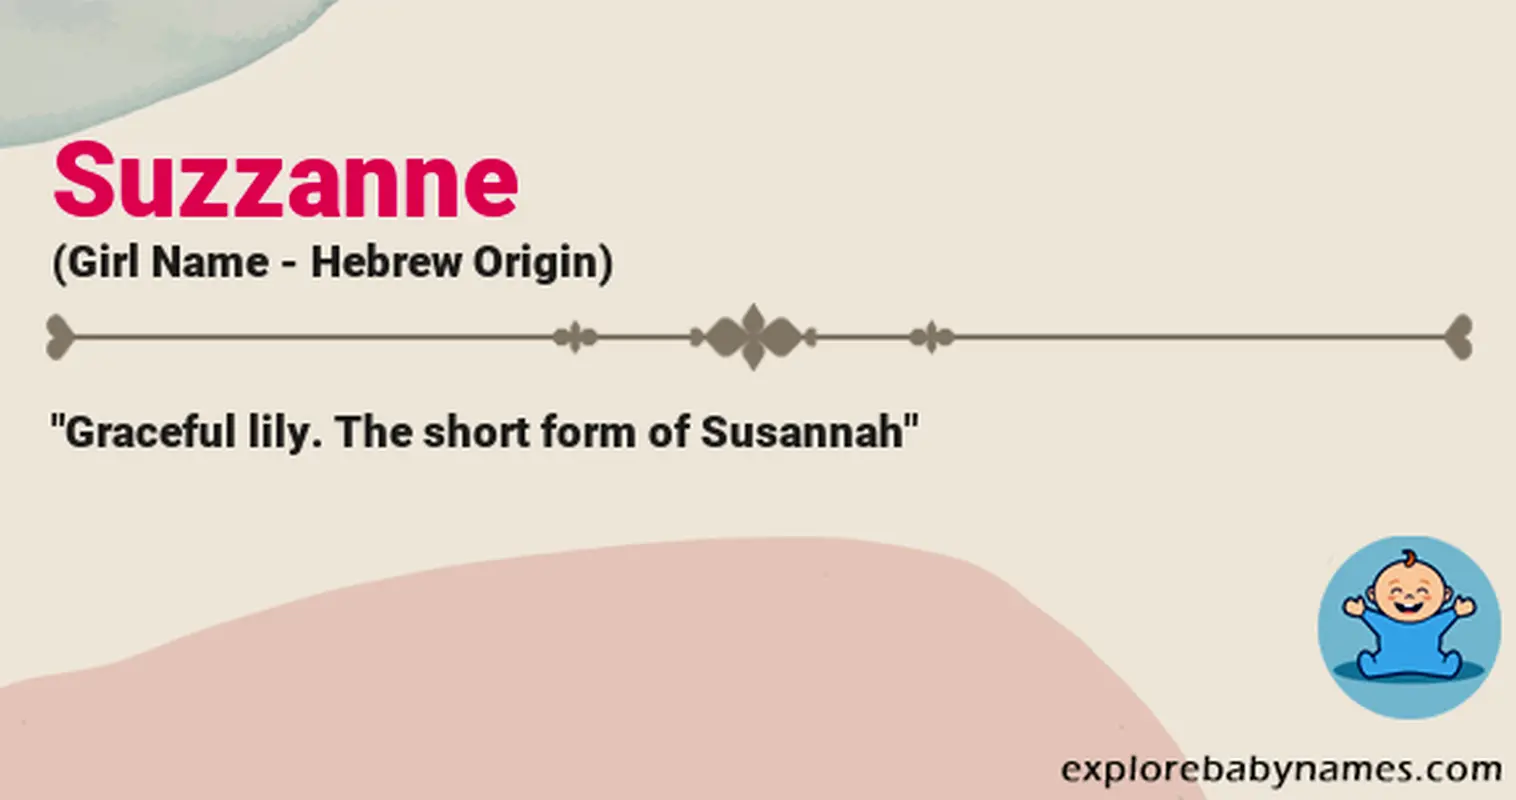 Meaning of Suzzanne